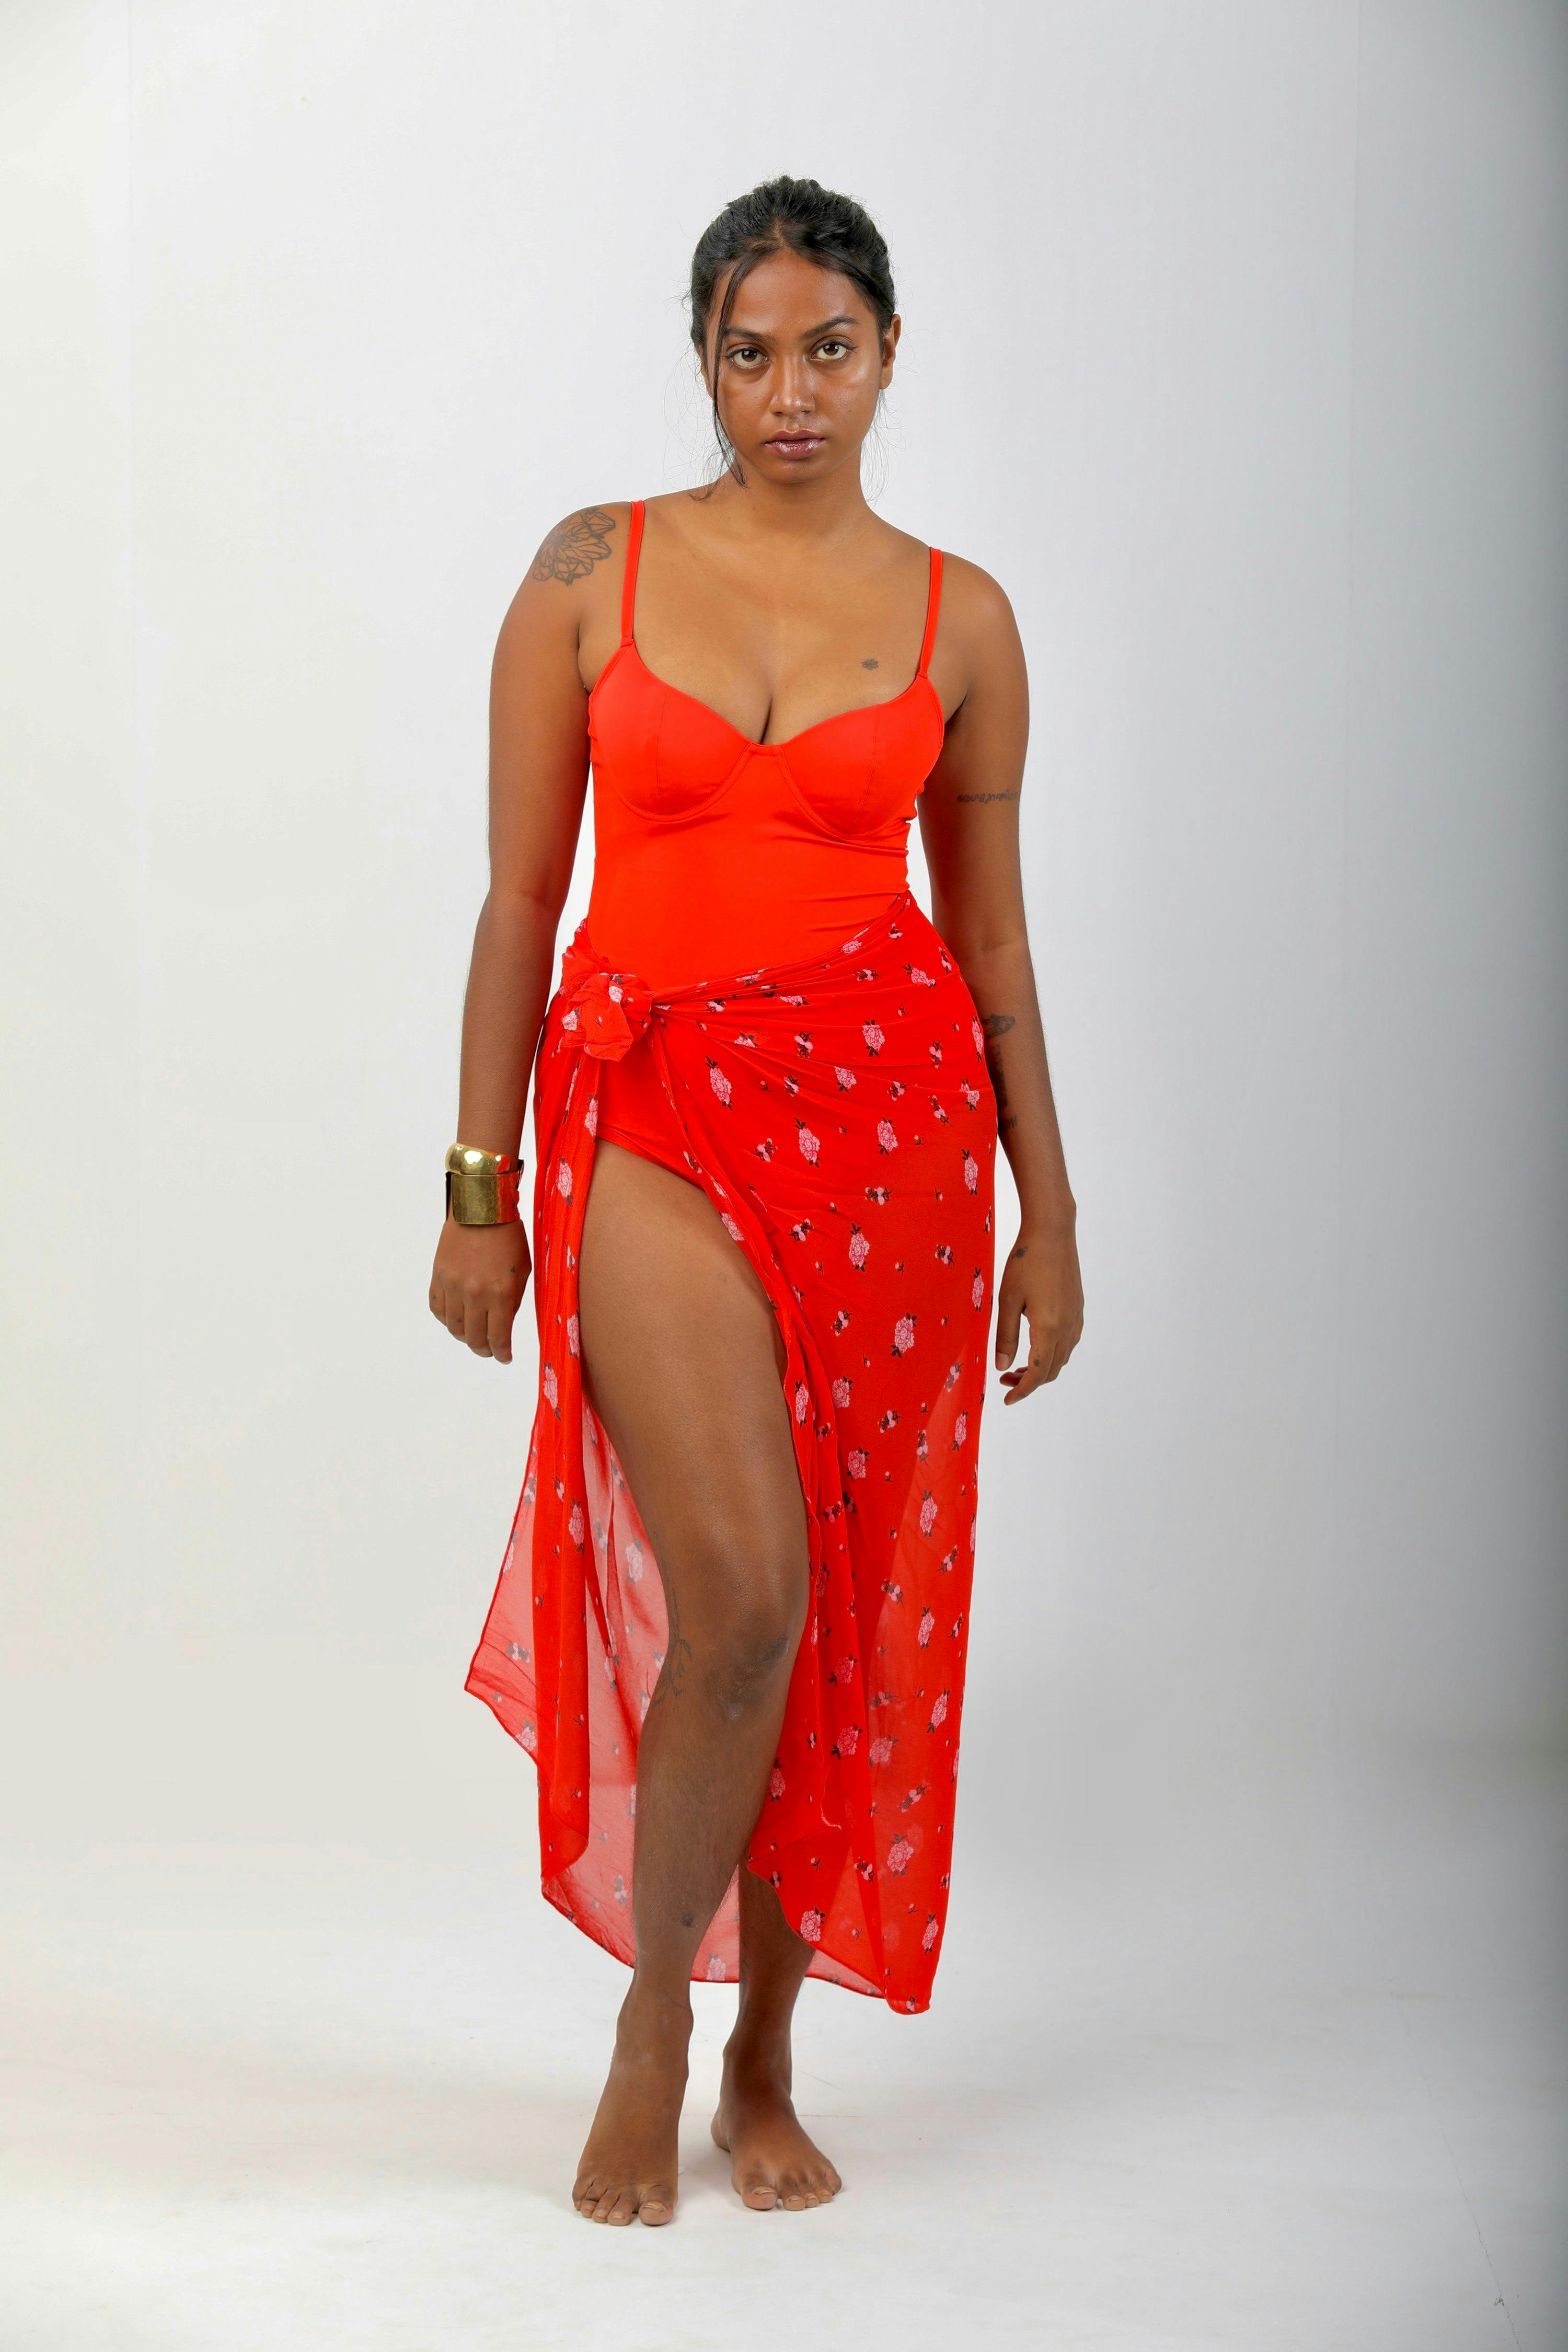 Thumbnail preview #2 for Underwired and Padded One Piece Swimsuit- Orange